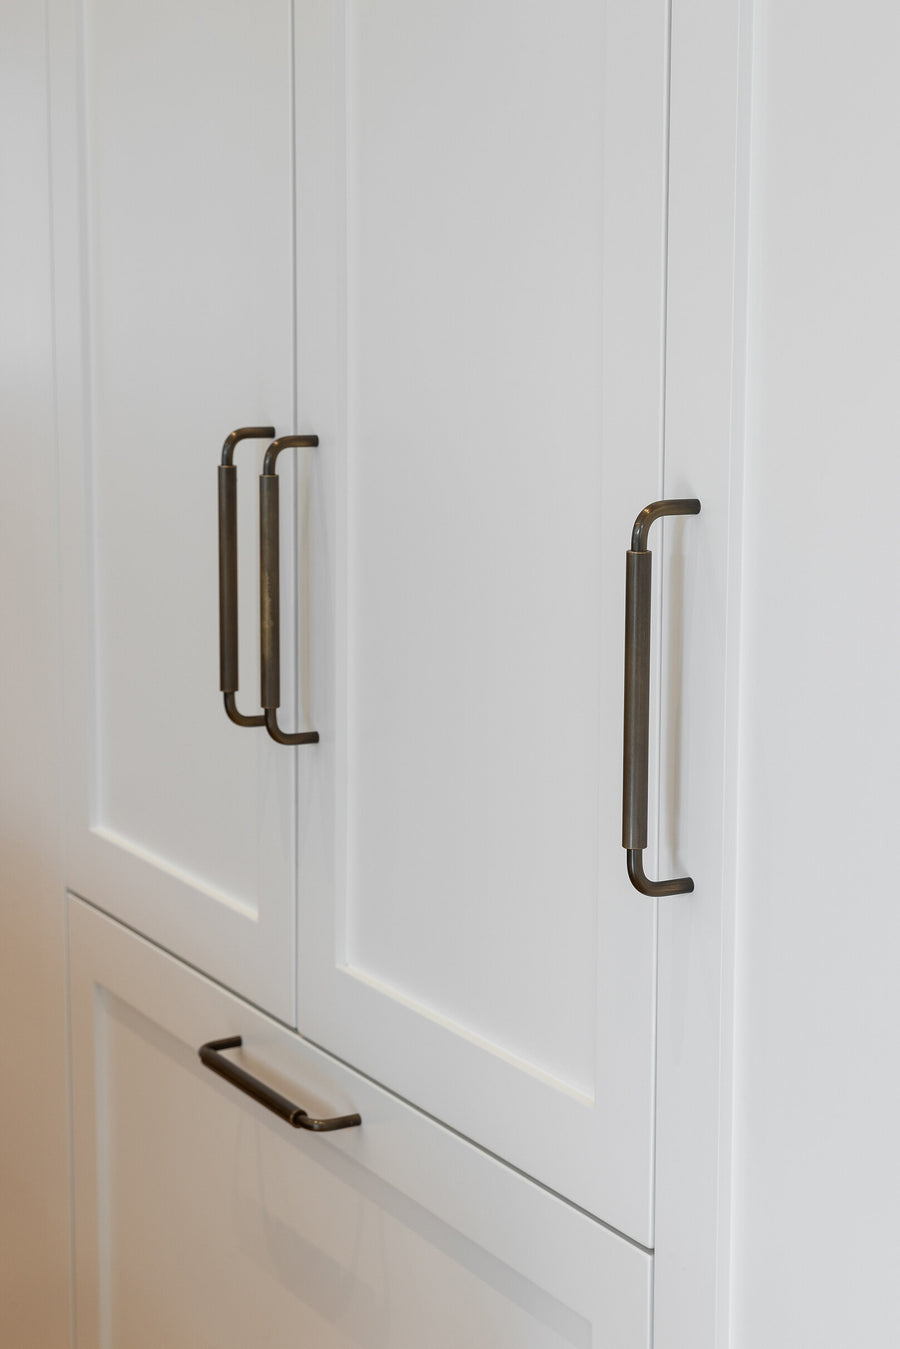 Beam Slide Handle. Available For Cabinetry